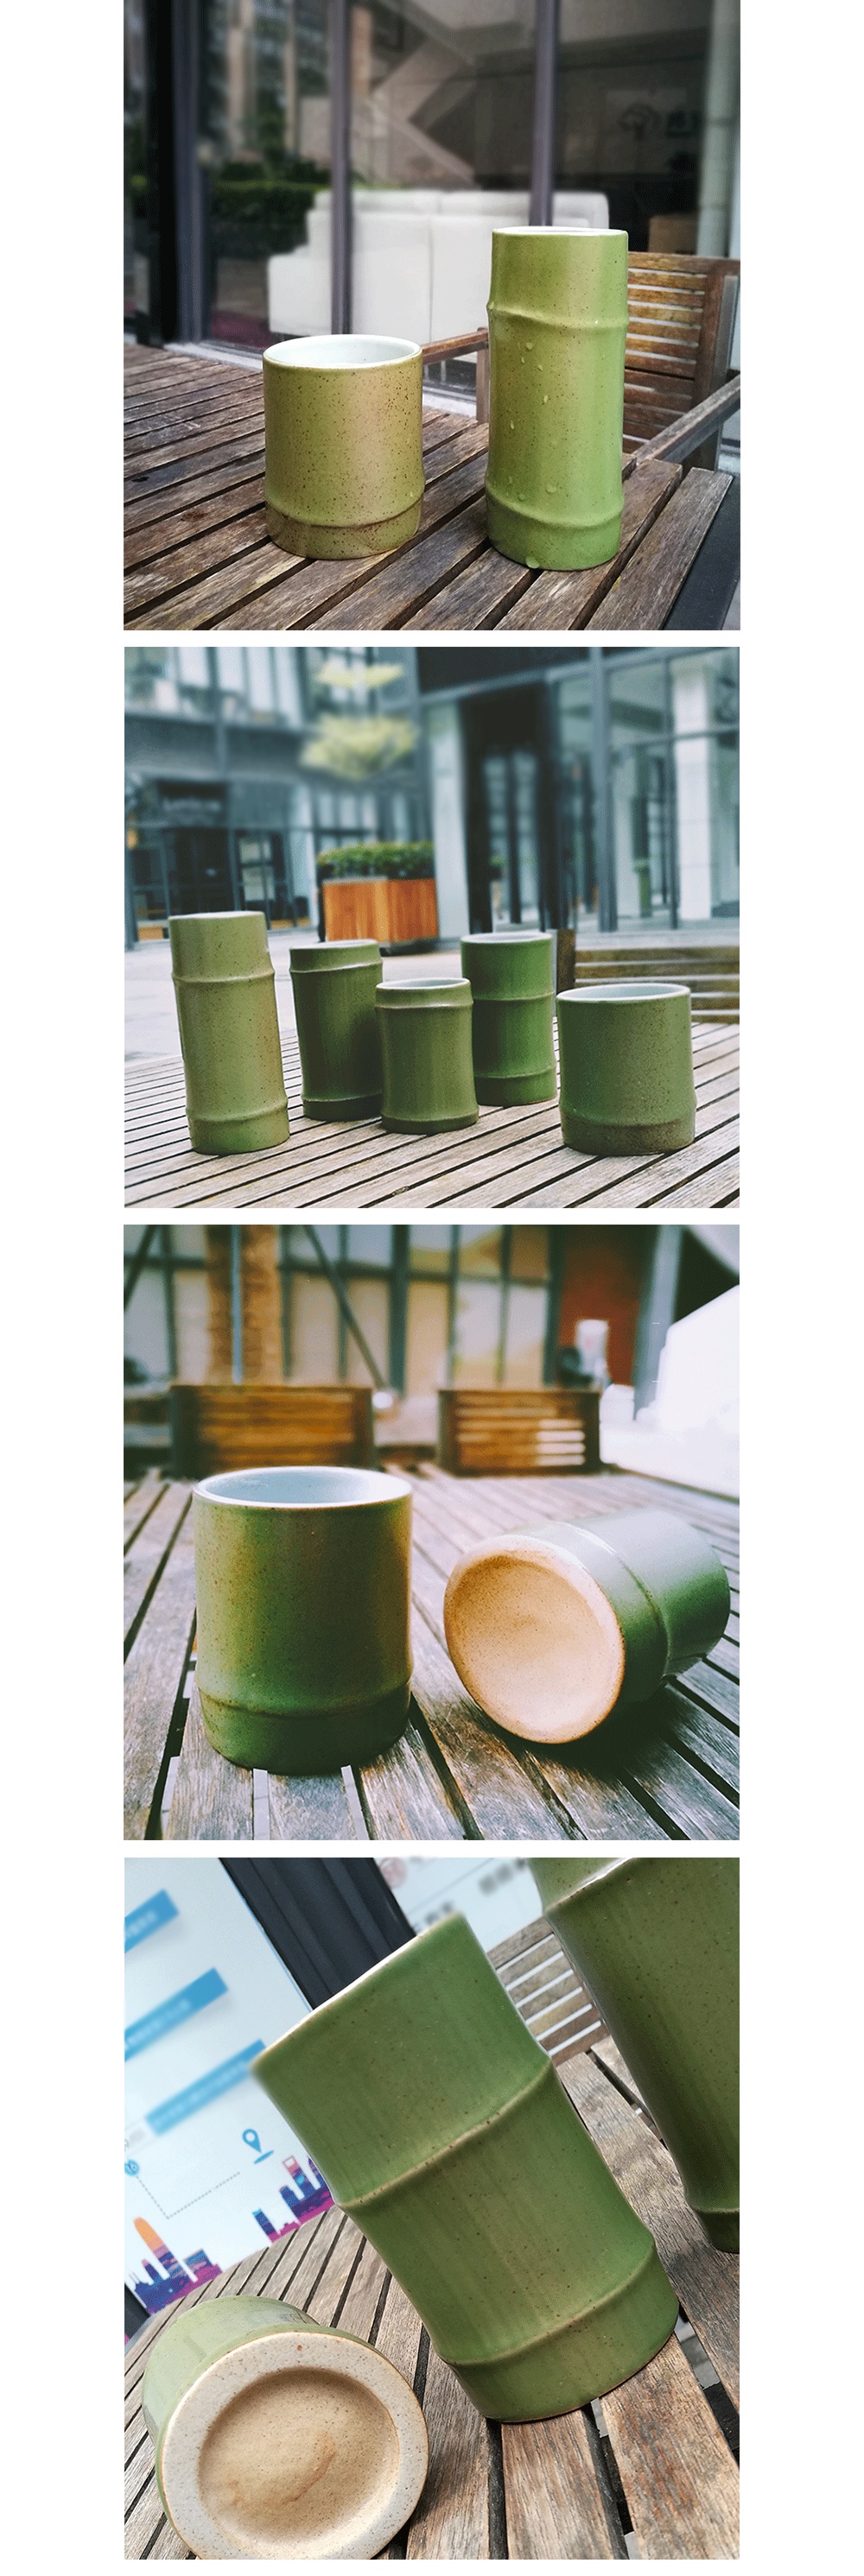 https://rs.apolloboxassets.com/images/sku1764-Bamboo-Shaped-Cup/Detail_2.jpg